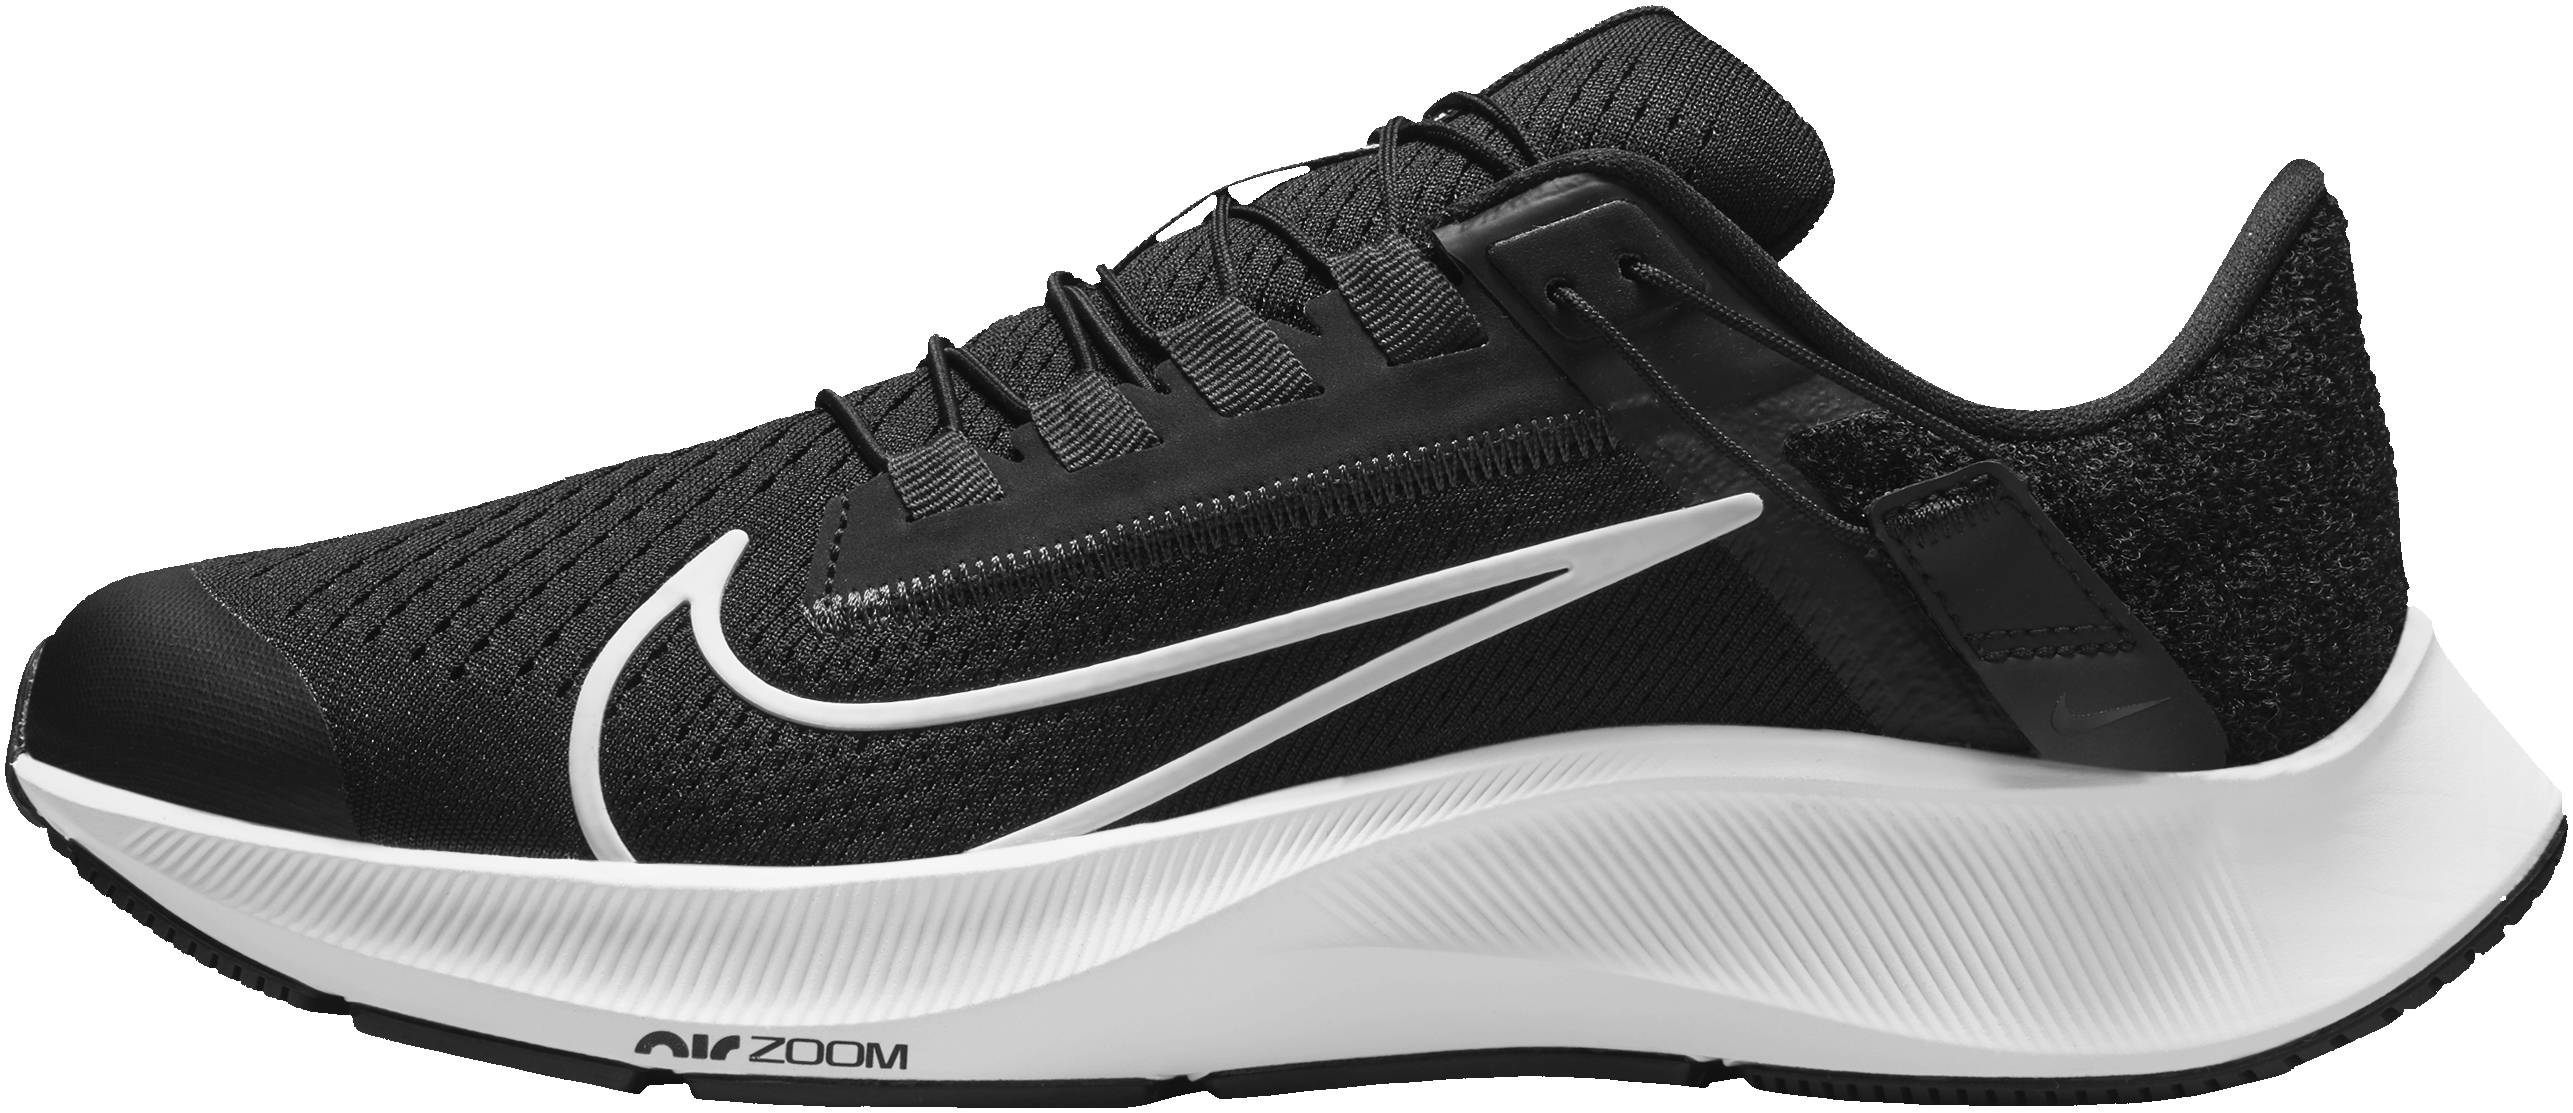 Nike Air Zoom Pegasus 38 FlyEase Review 2022, Facts, Deals ($90